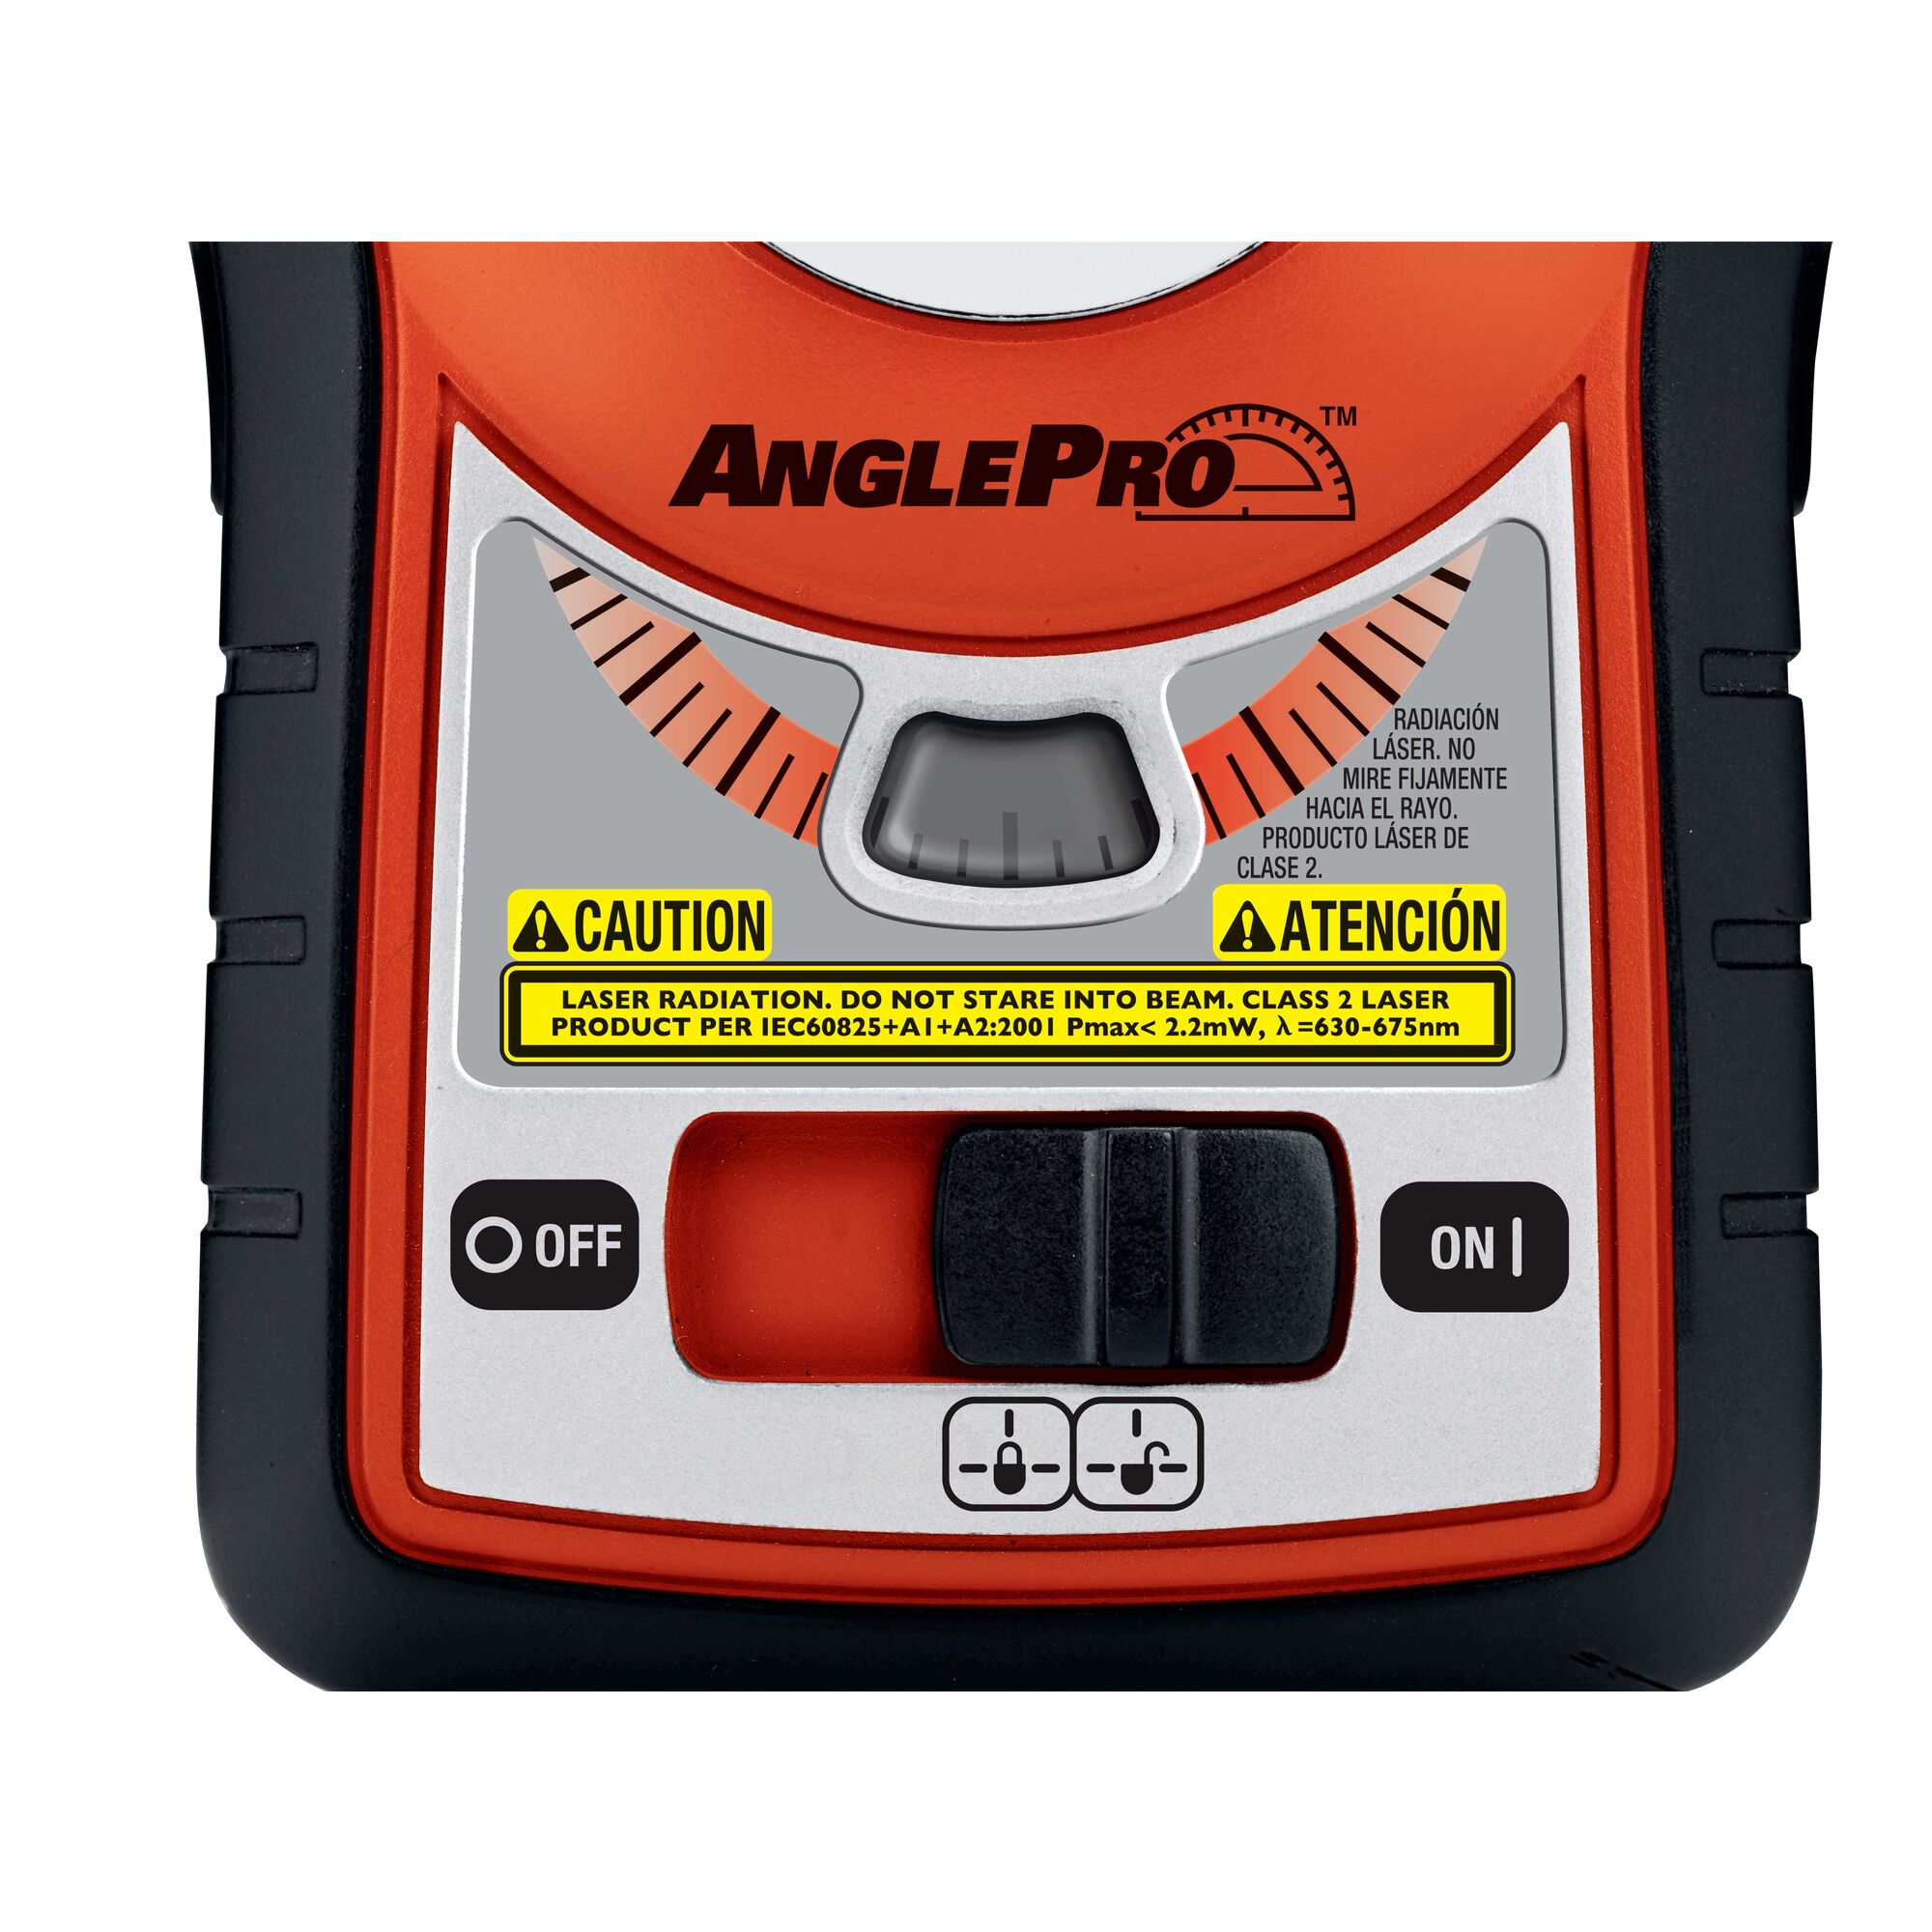 Power control feature of bulls eye auto leveling laser with AnglePro